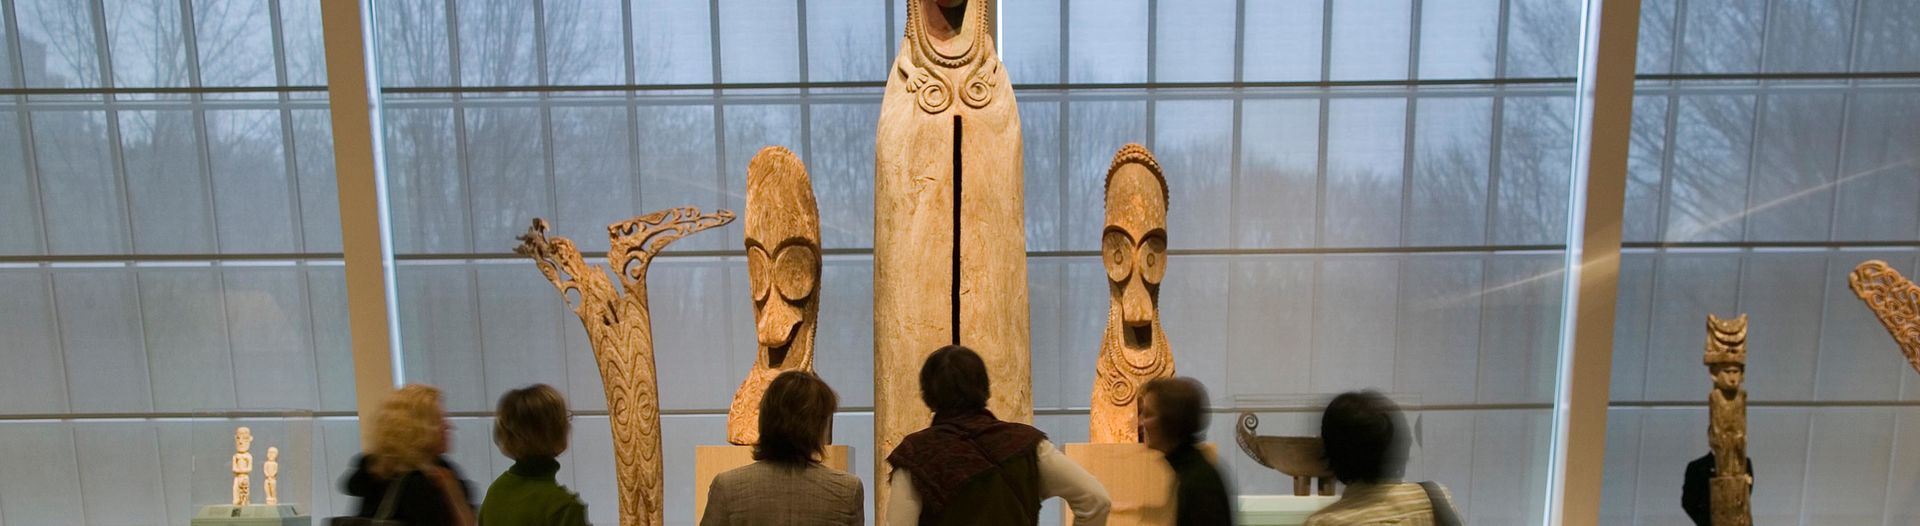 Group in gallery looking at wooden Oceanic sculptures